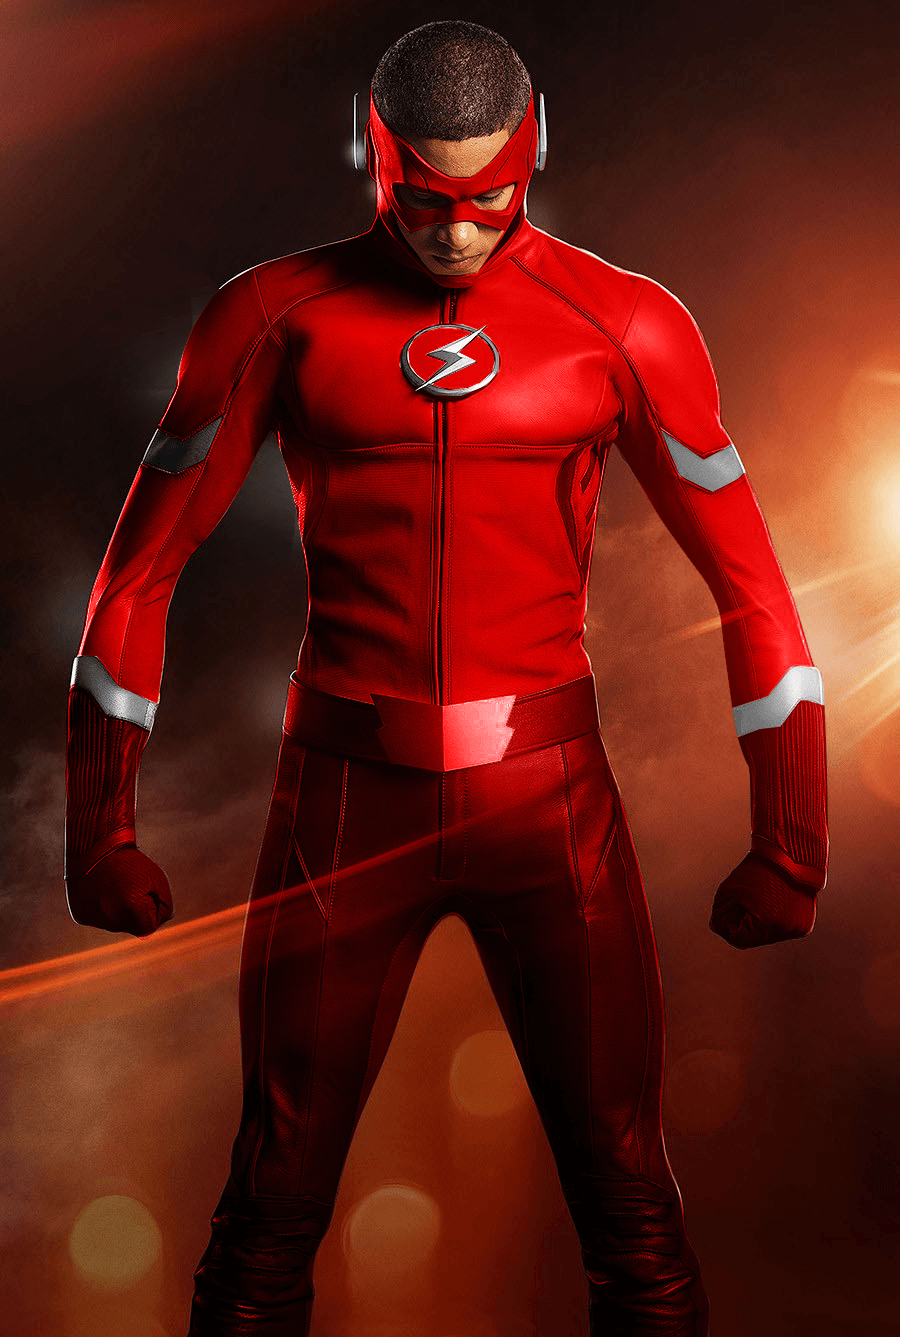 You Can’t Catch Me Barry! by Bosslogix